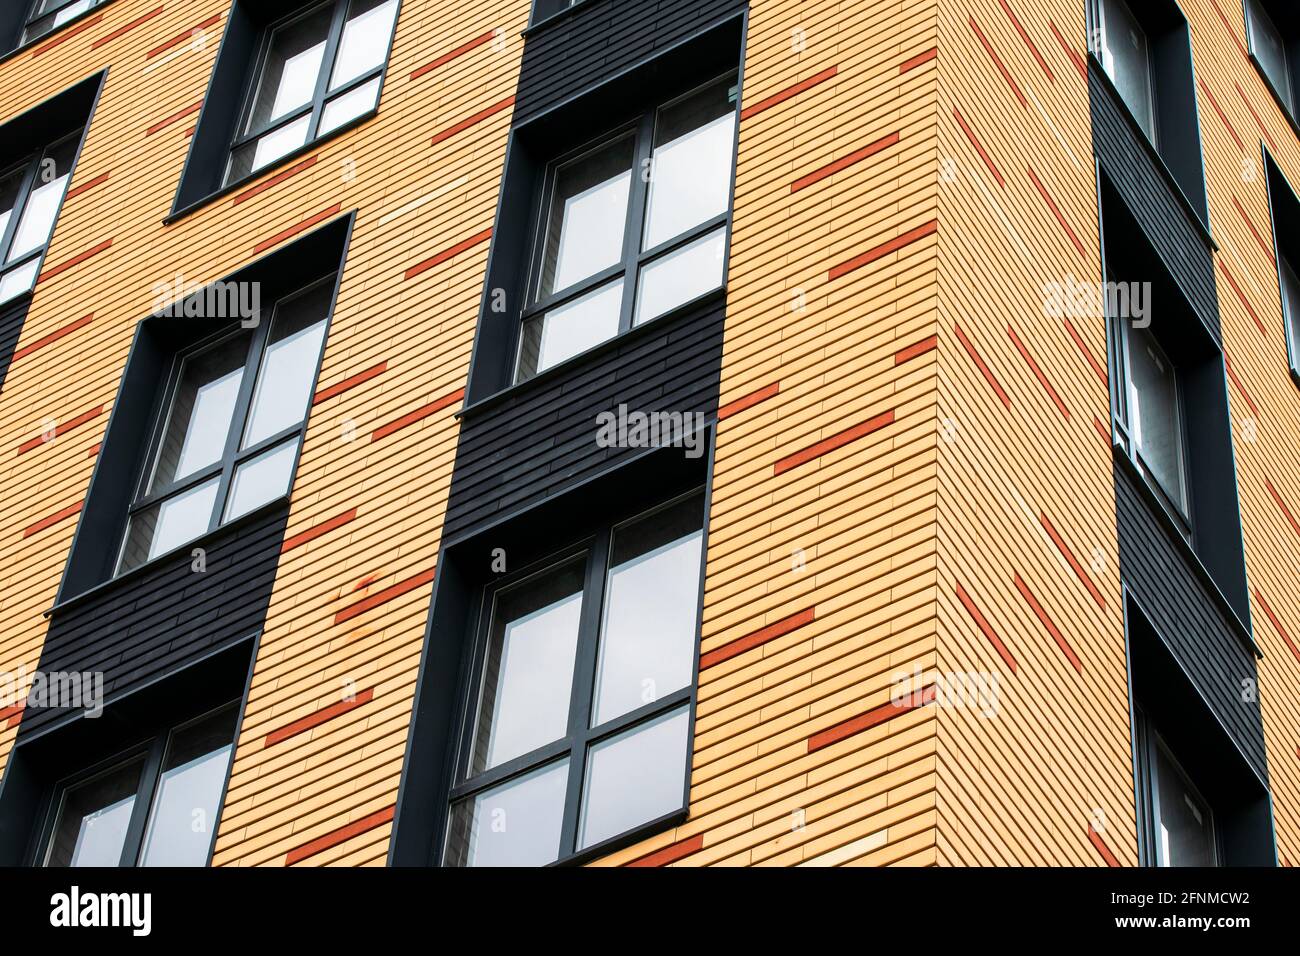 The wall of a brick multistoried building with transparent windows. Geometric abstract pattern. House facade texture, background Stock Photo